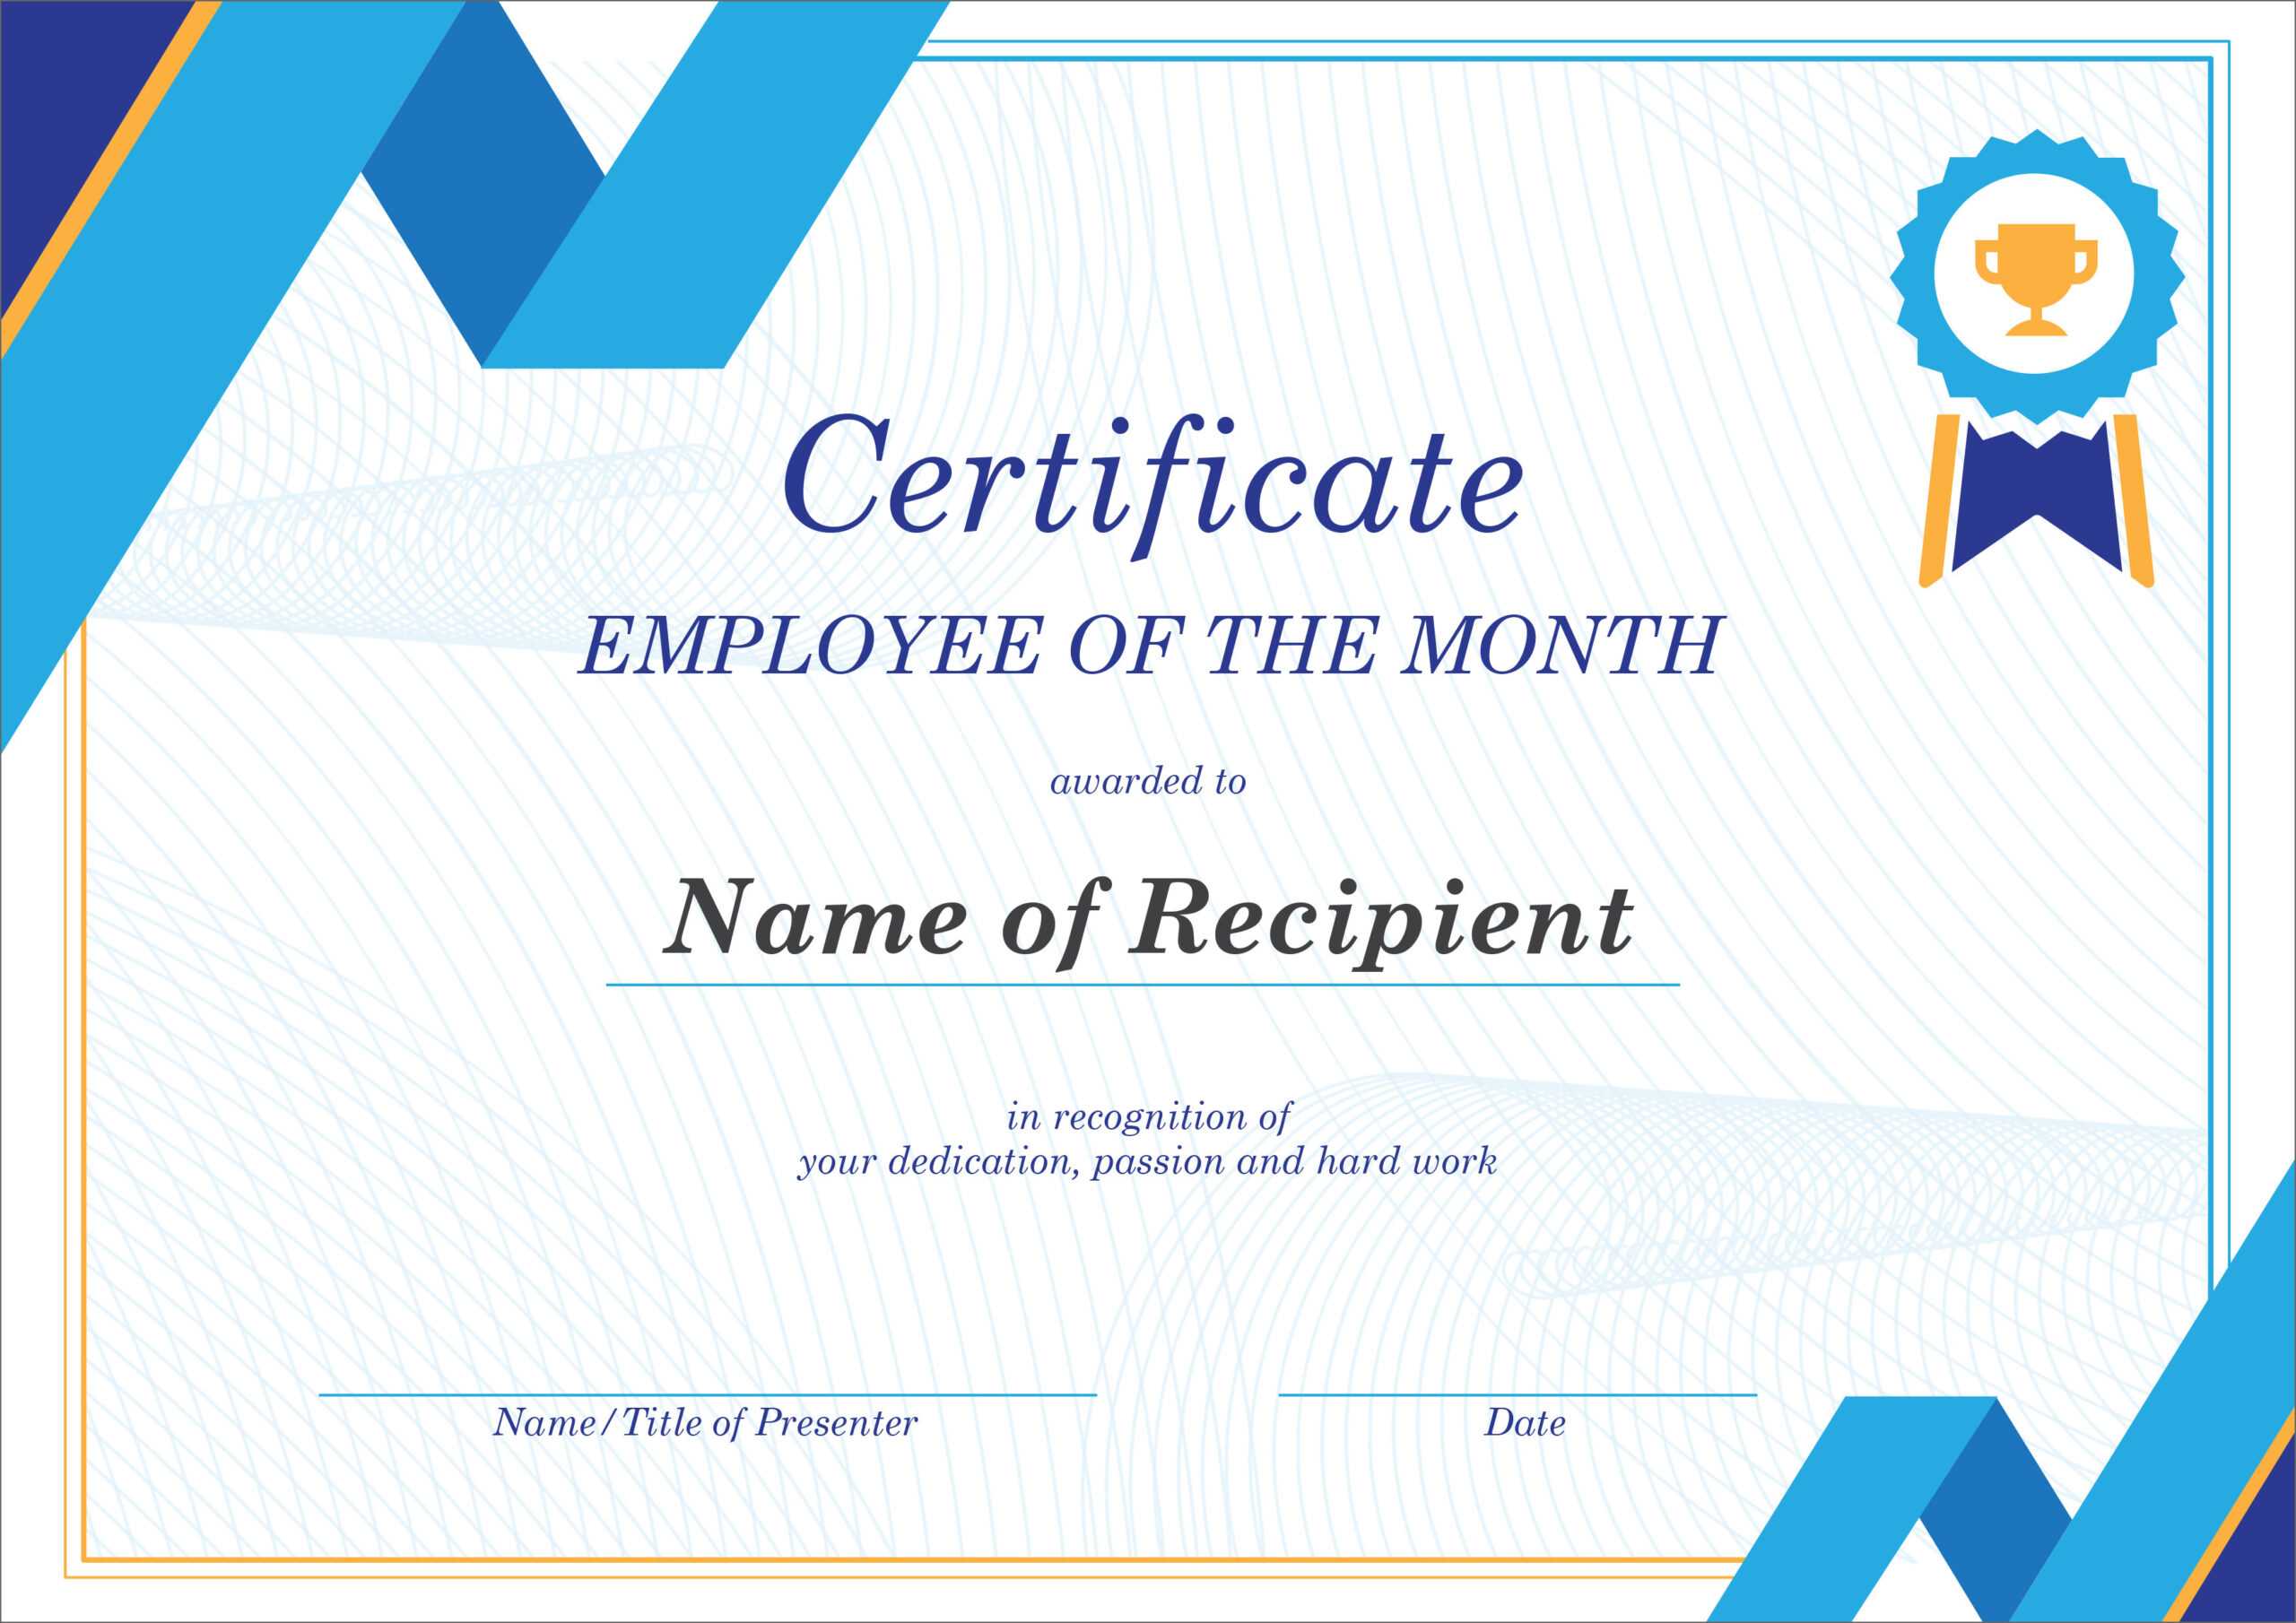 50 Free Creative Blank Certificate Templates In Psd With Best Employee Award Certificate Templates